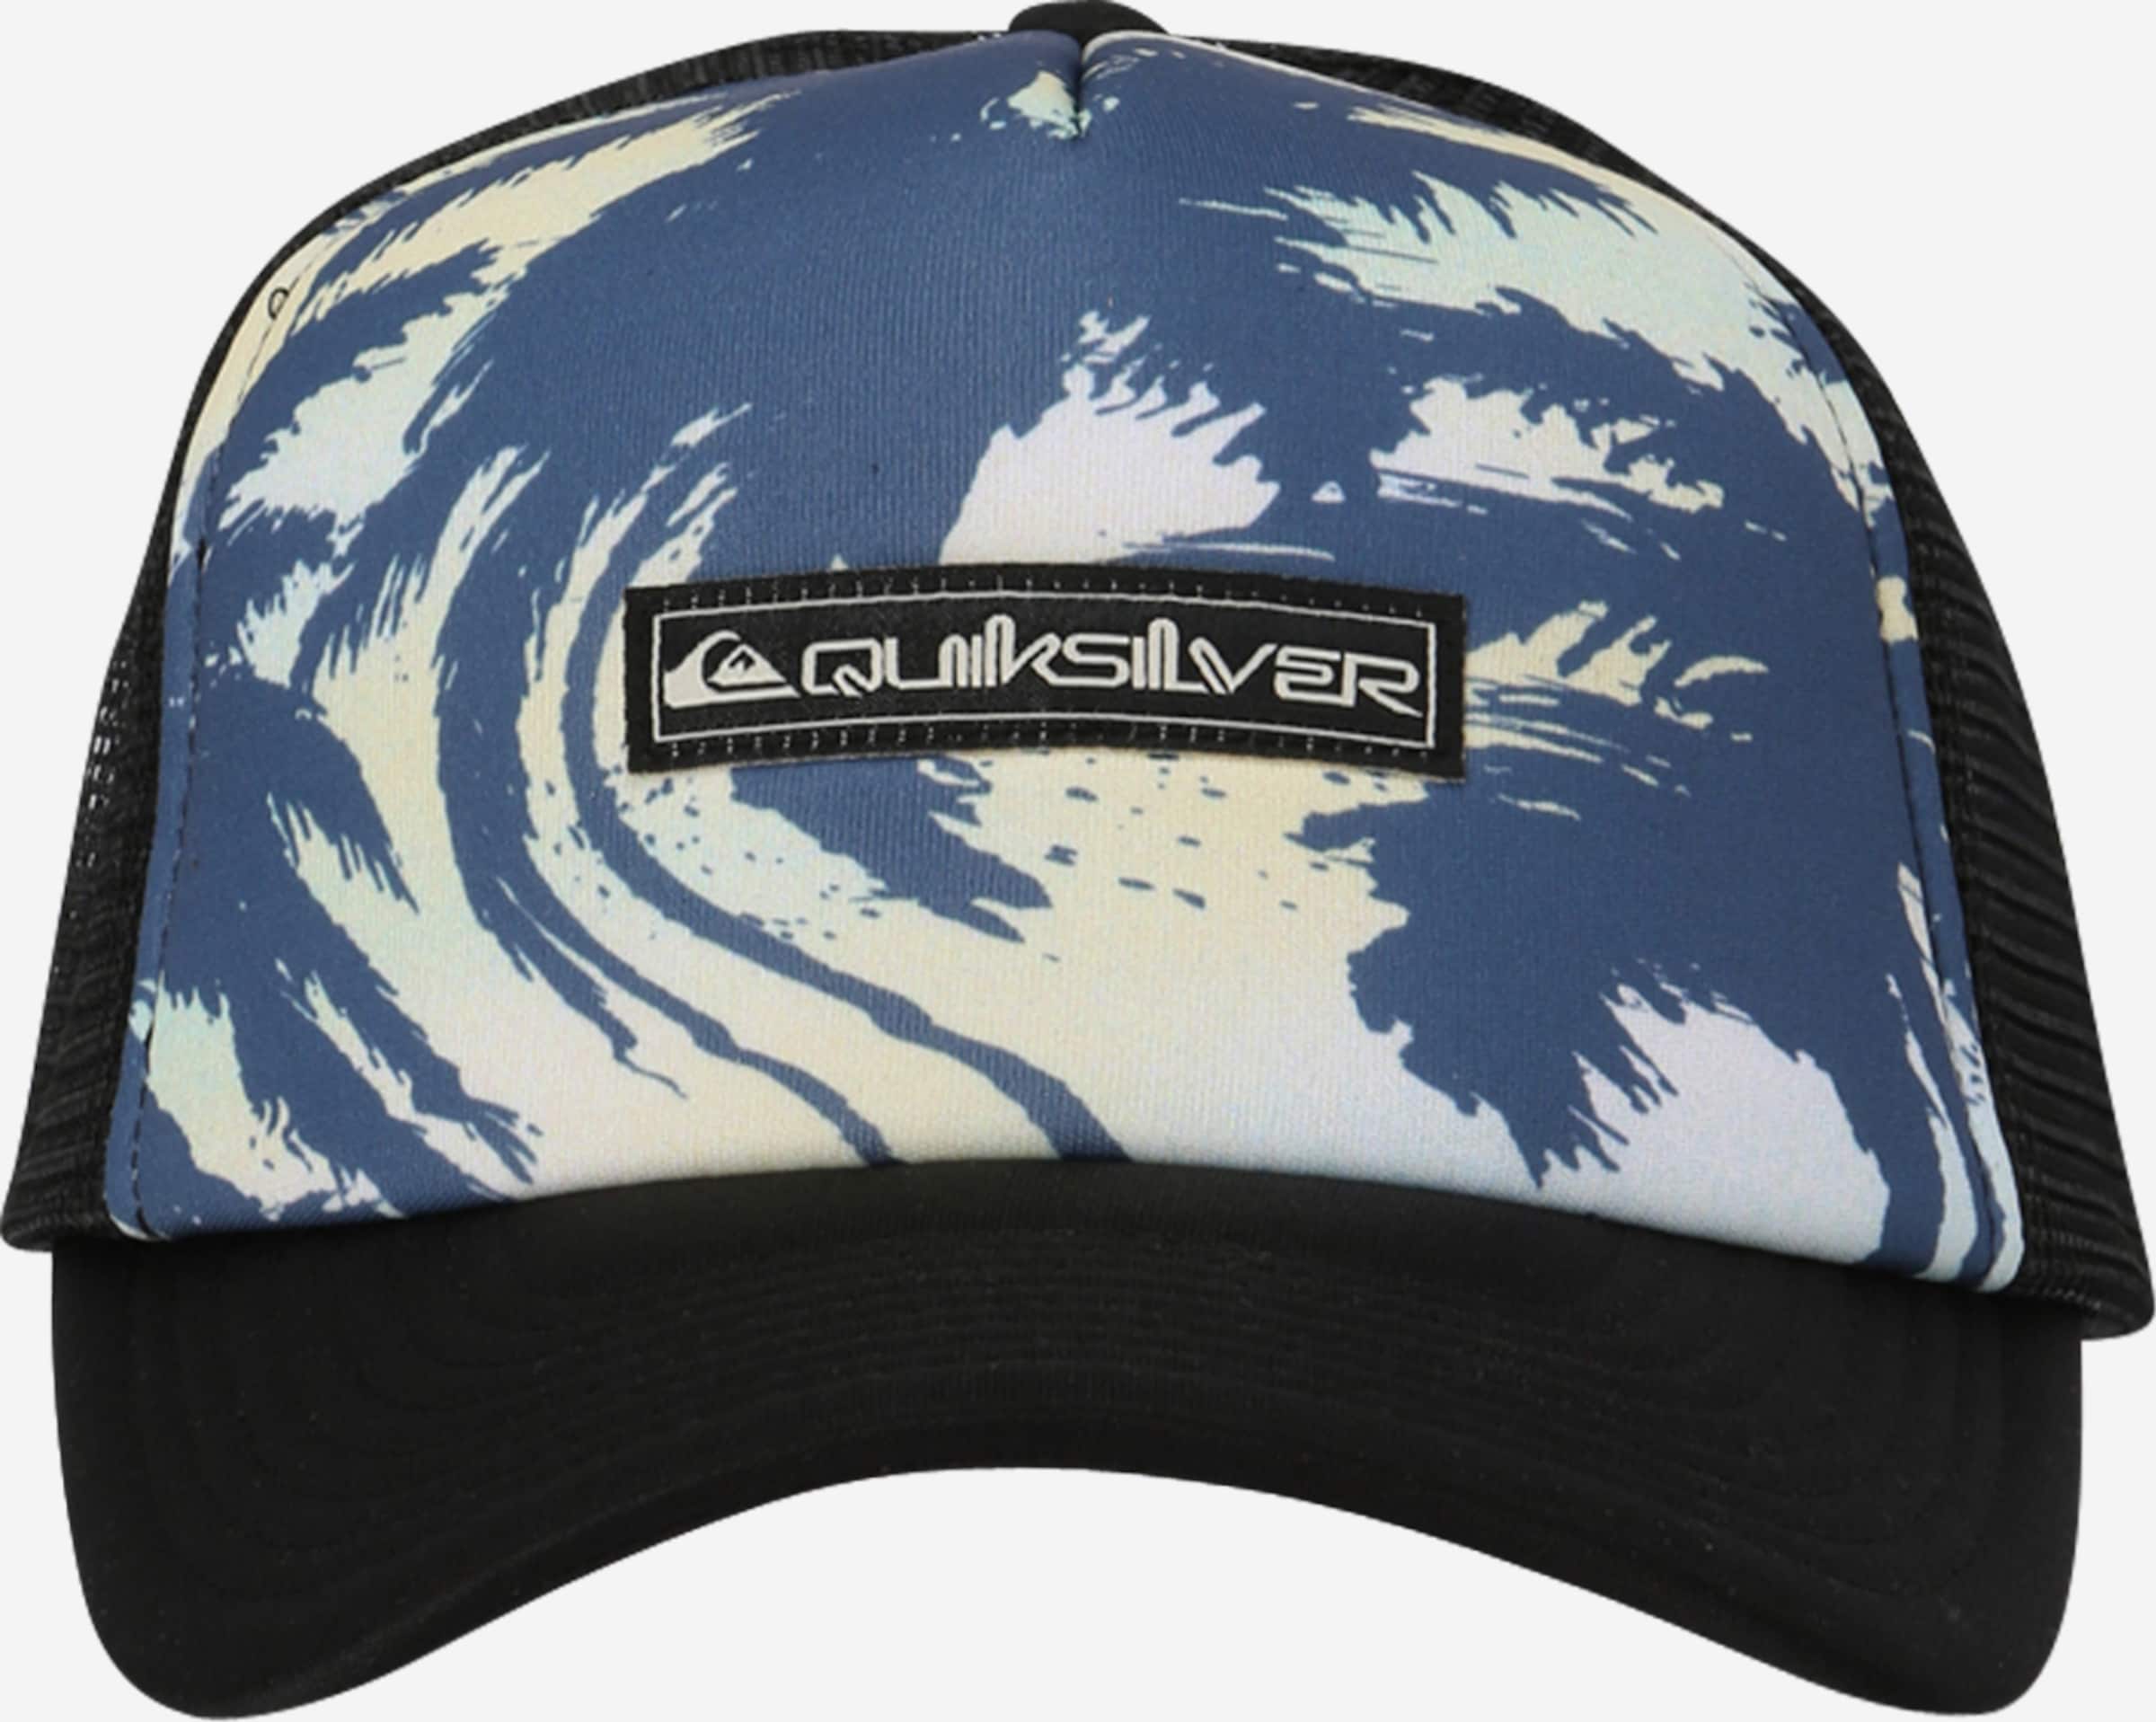 QUIKSILVER Cap | ABOUT Black in \'VULTURE COOP\' YOU